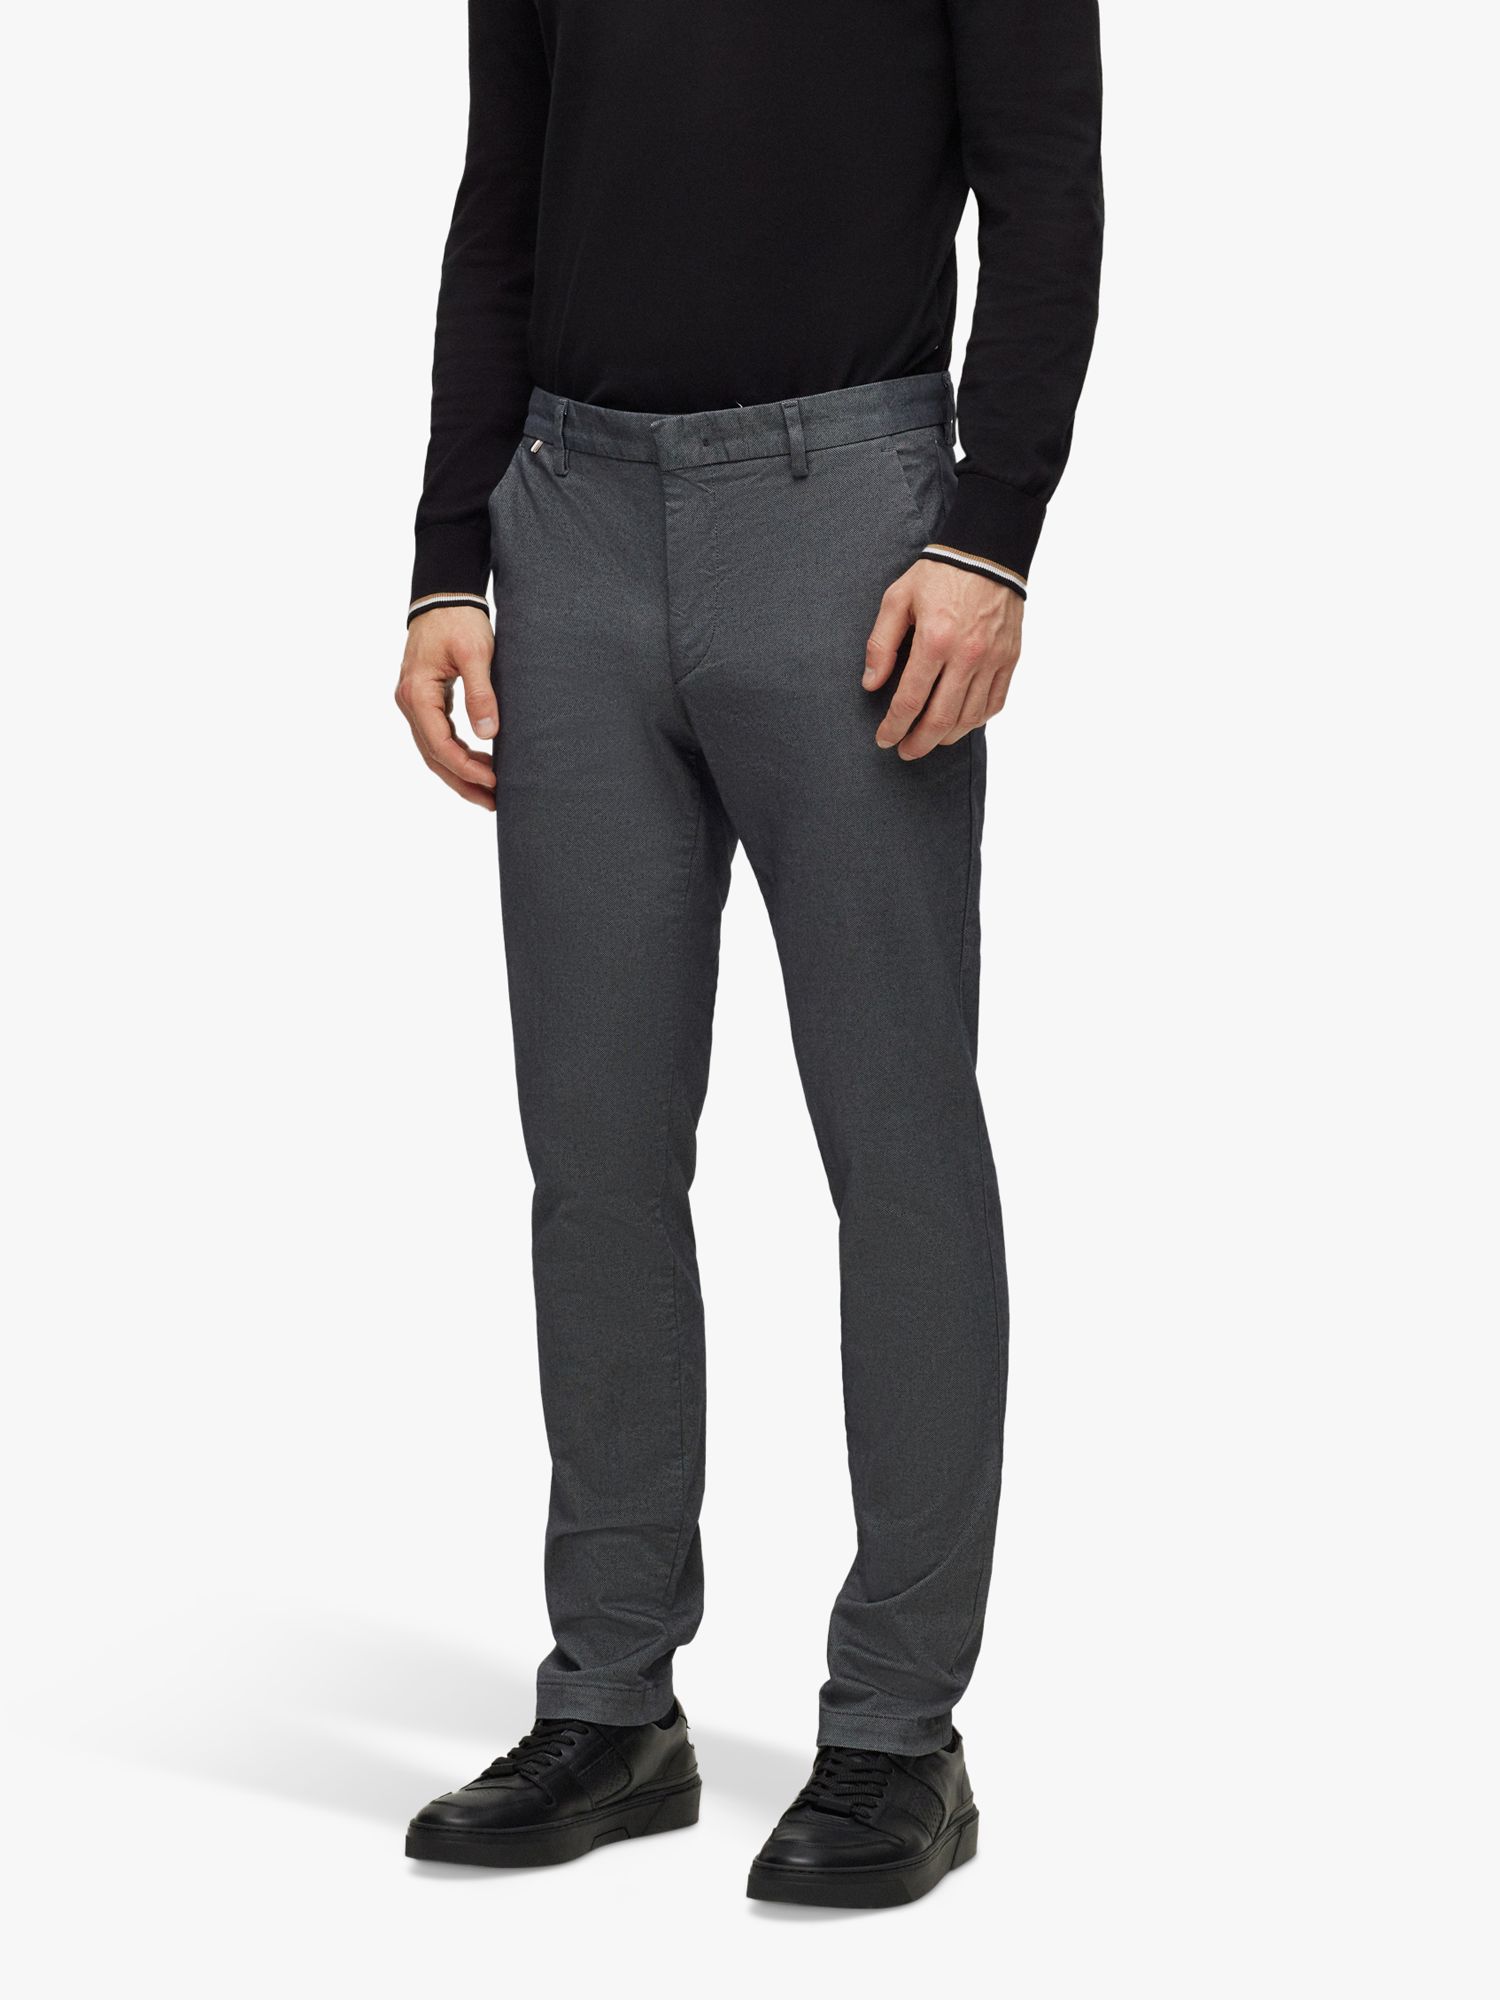 BOSS Kaito Slim Fit Trousers, Silver at John Lewis & Partners